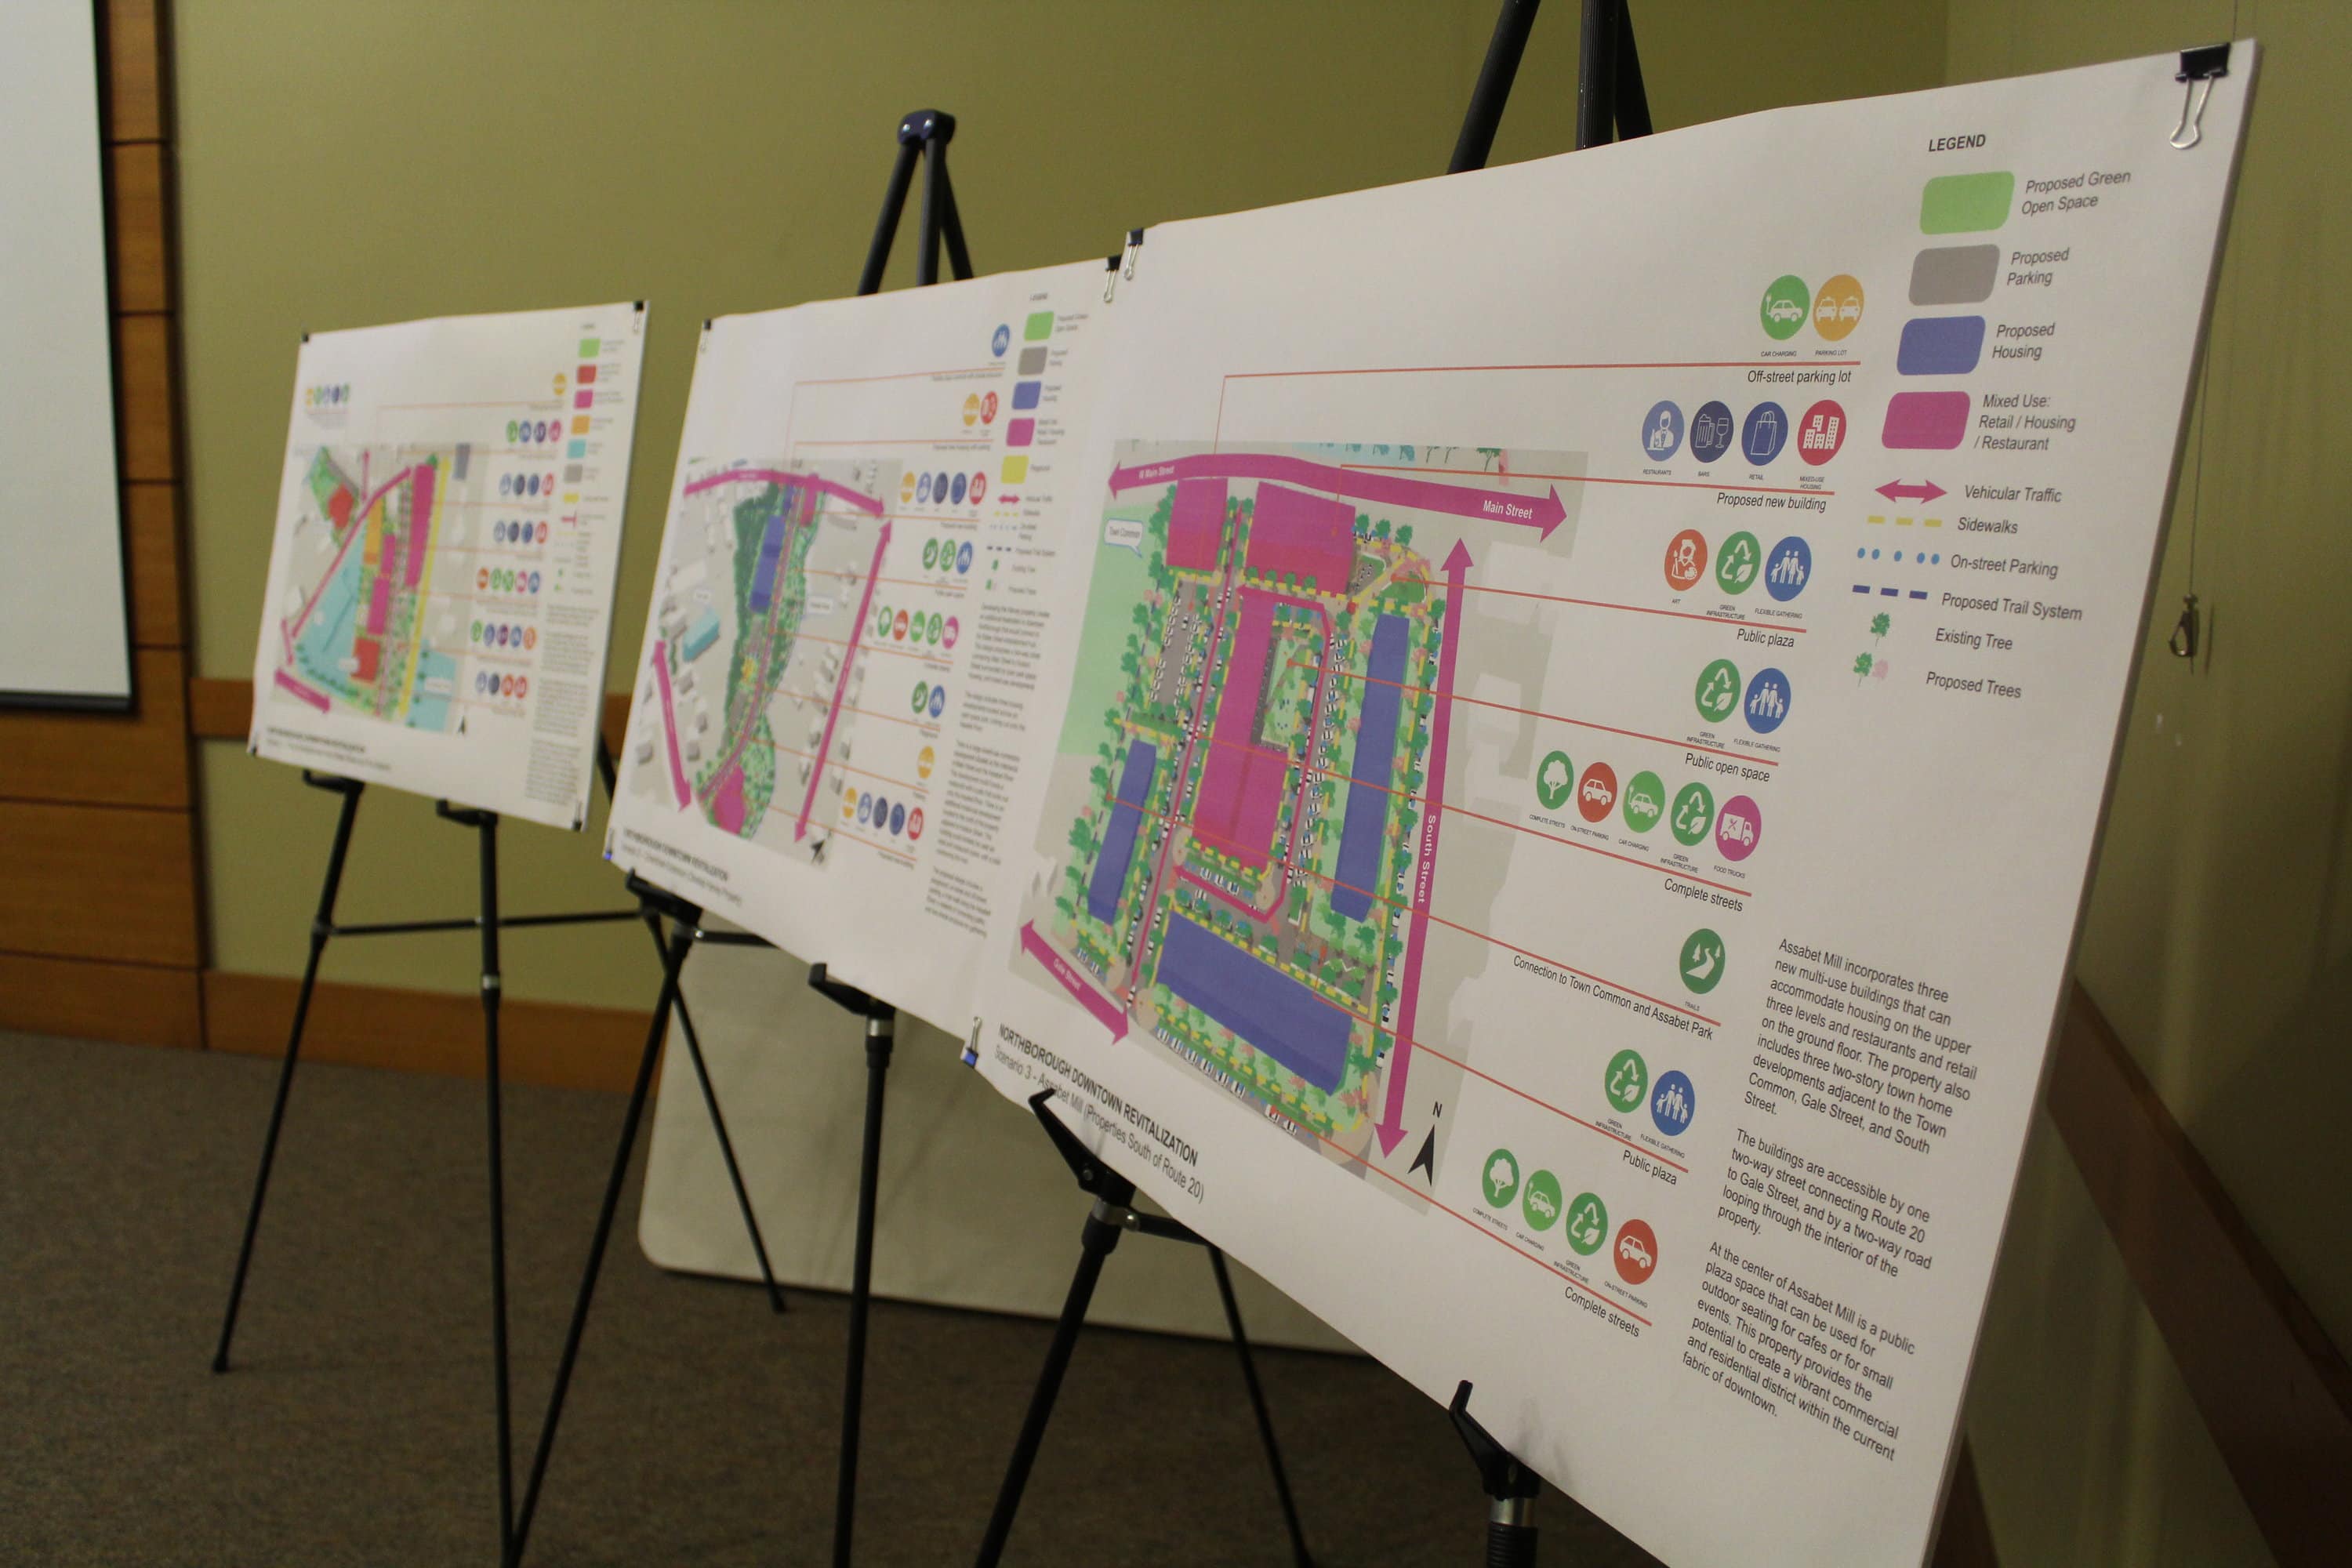 Northborough downtown revitalization plan to be presented